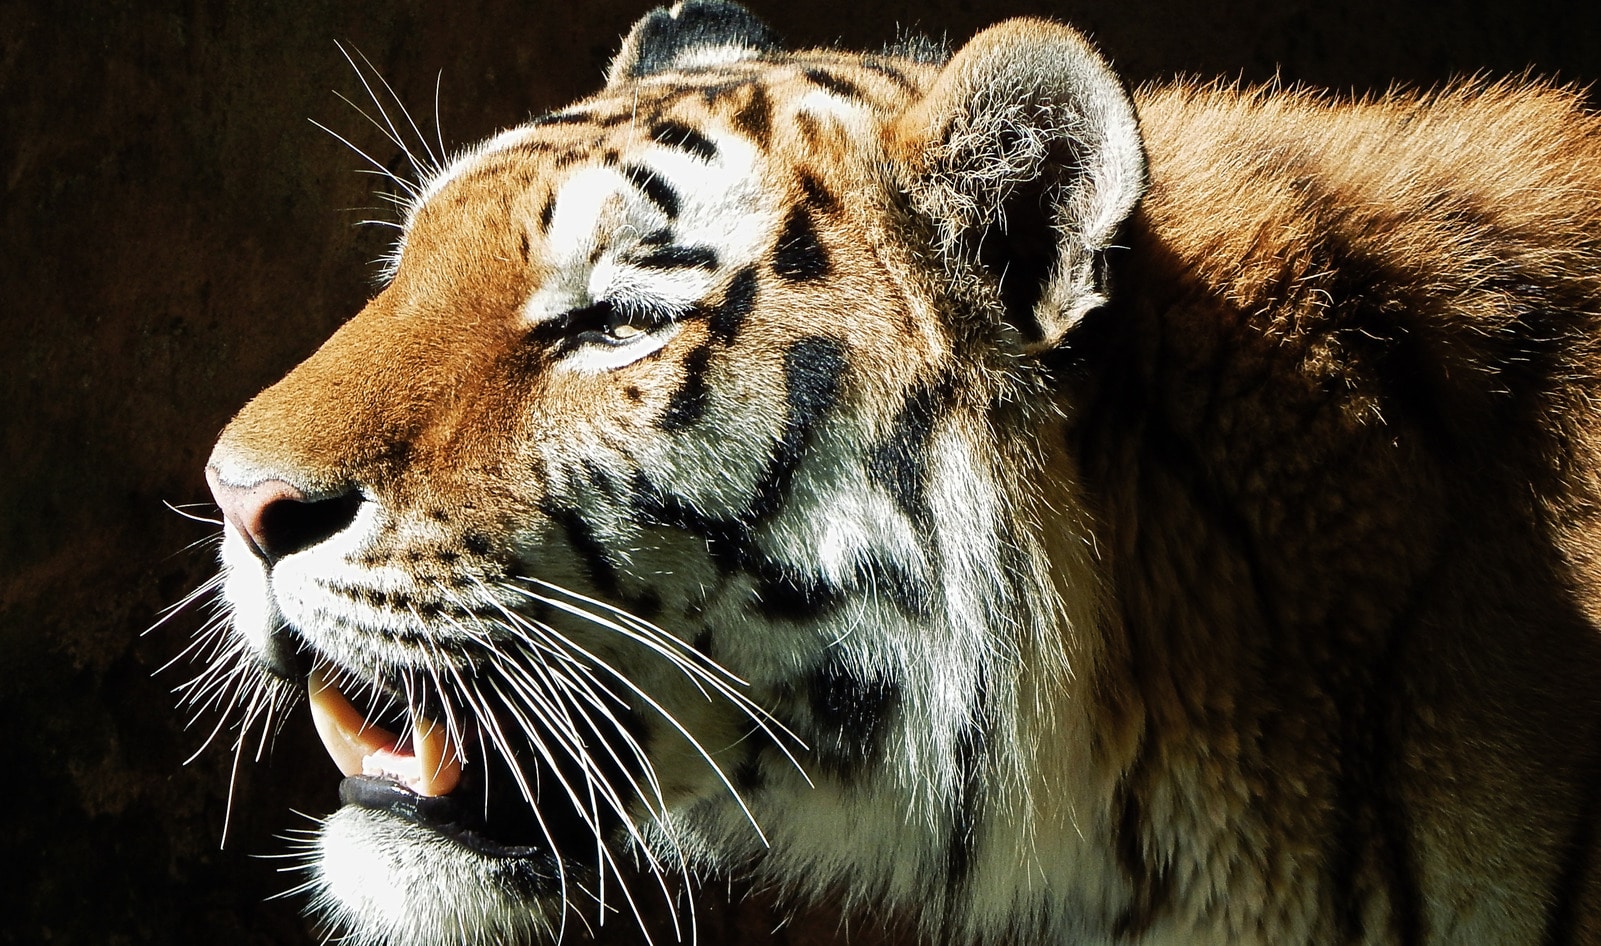 California to Become Third State to Ban Wild Animal Circuses